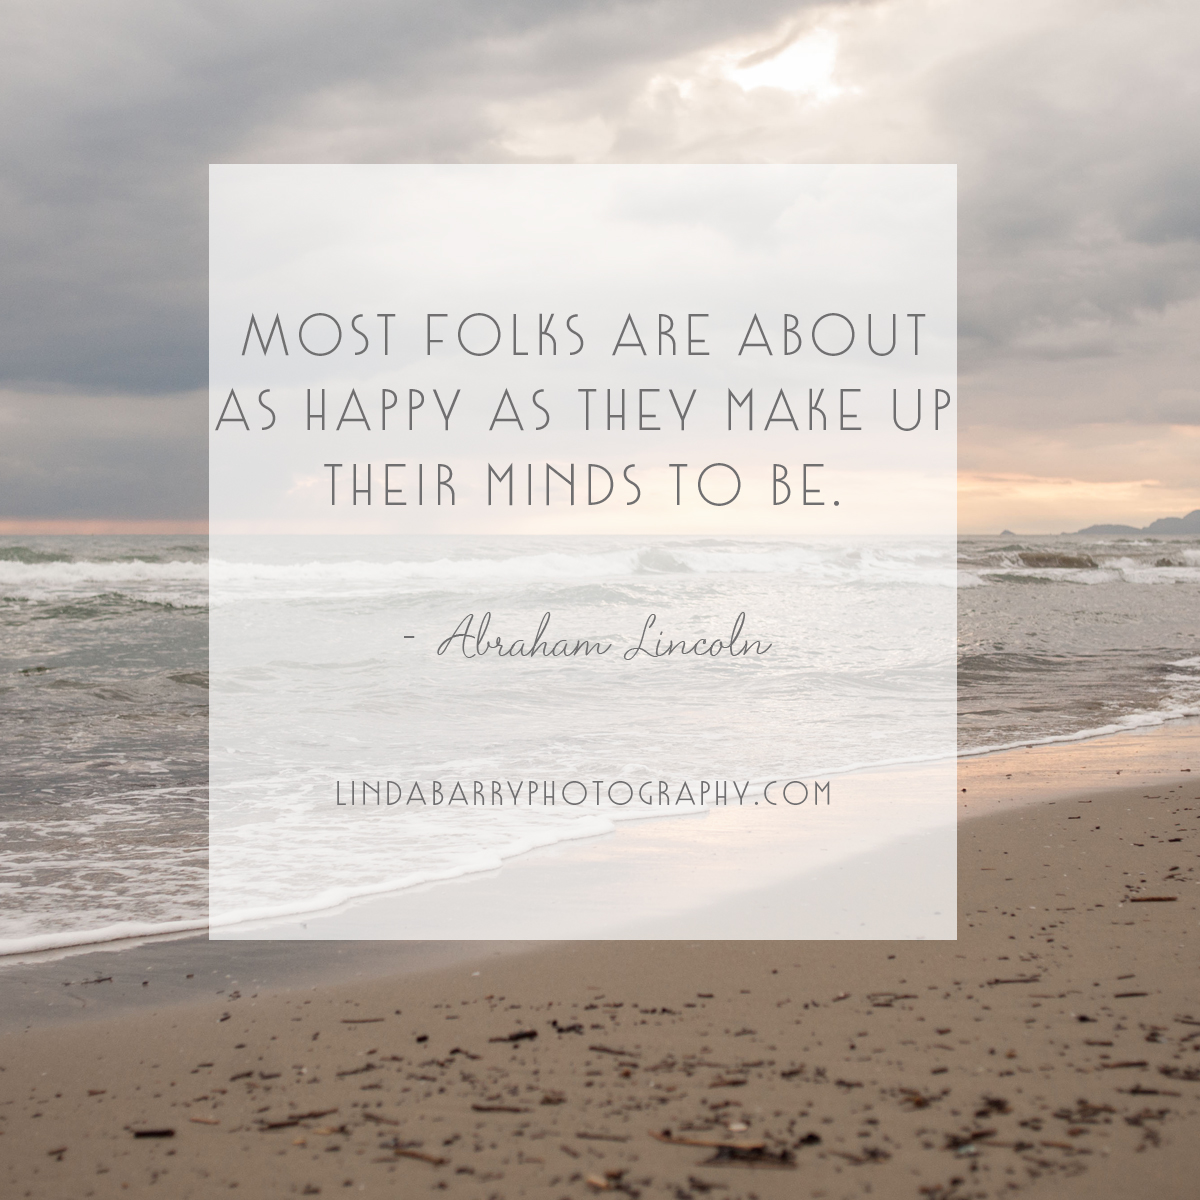 "Most folks are about as happy as they make up their minds to be." - Abraham Lincoln inspirational quote.